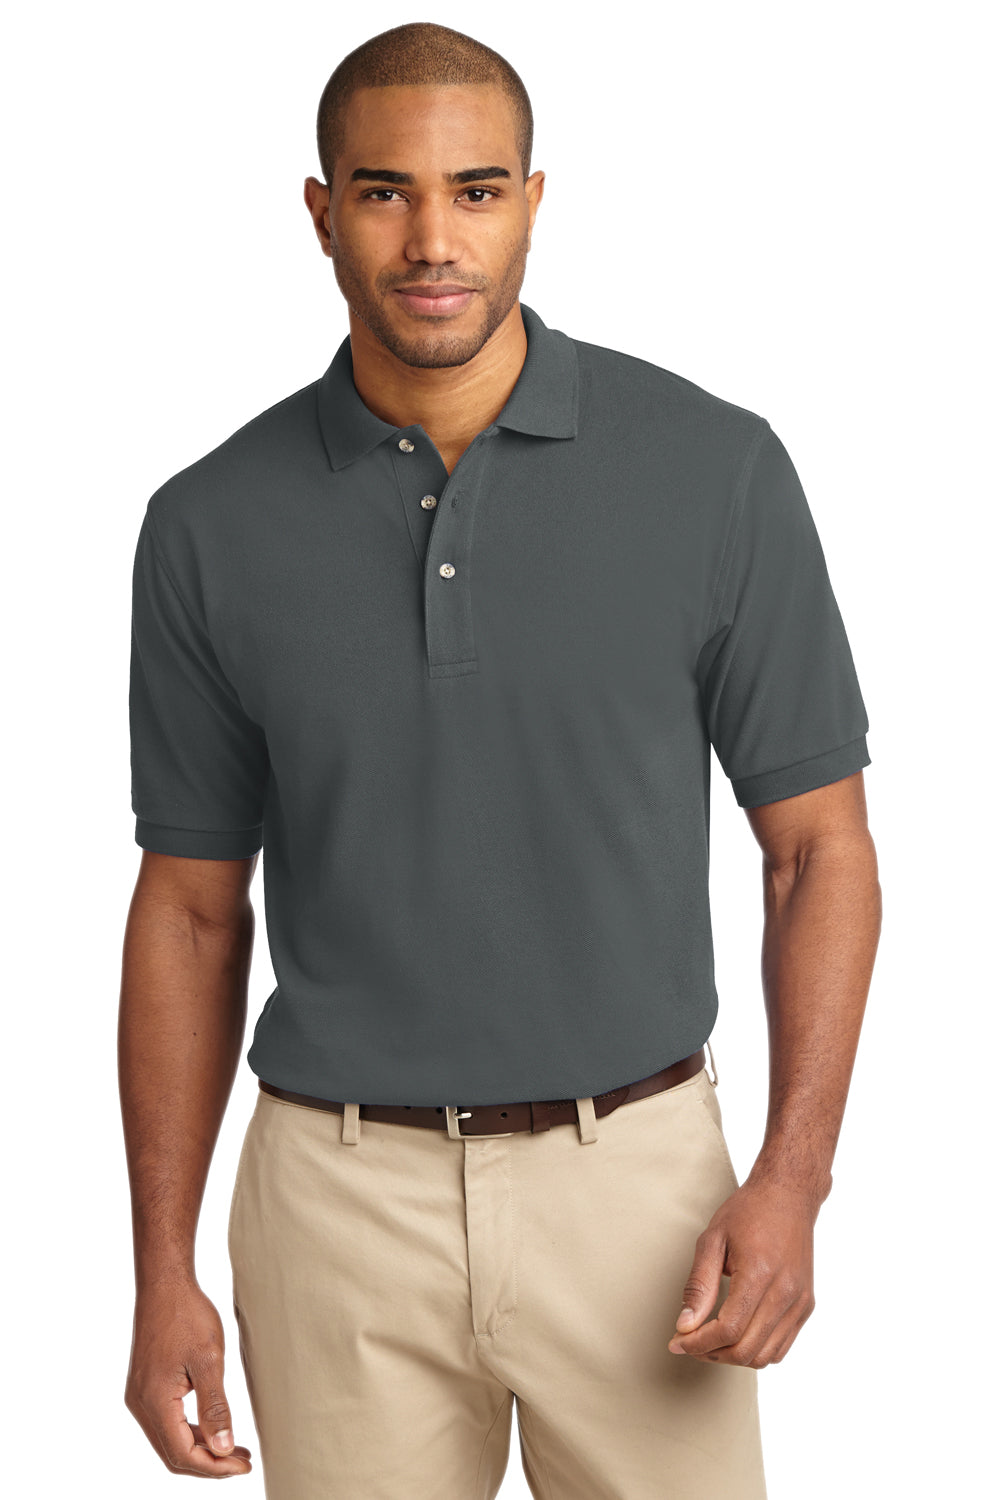 Port Authority K420 Mens Short Sleeve Polo Shirt Steel Grey Front